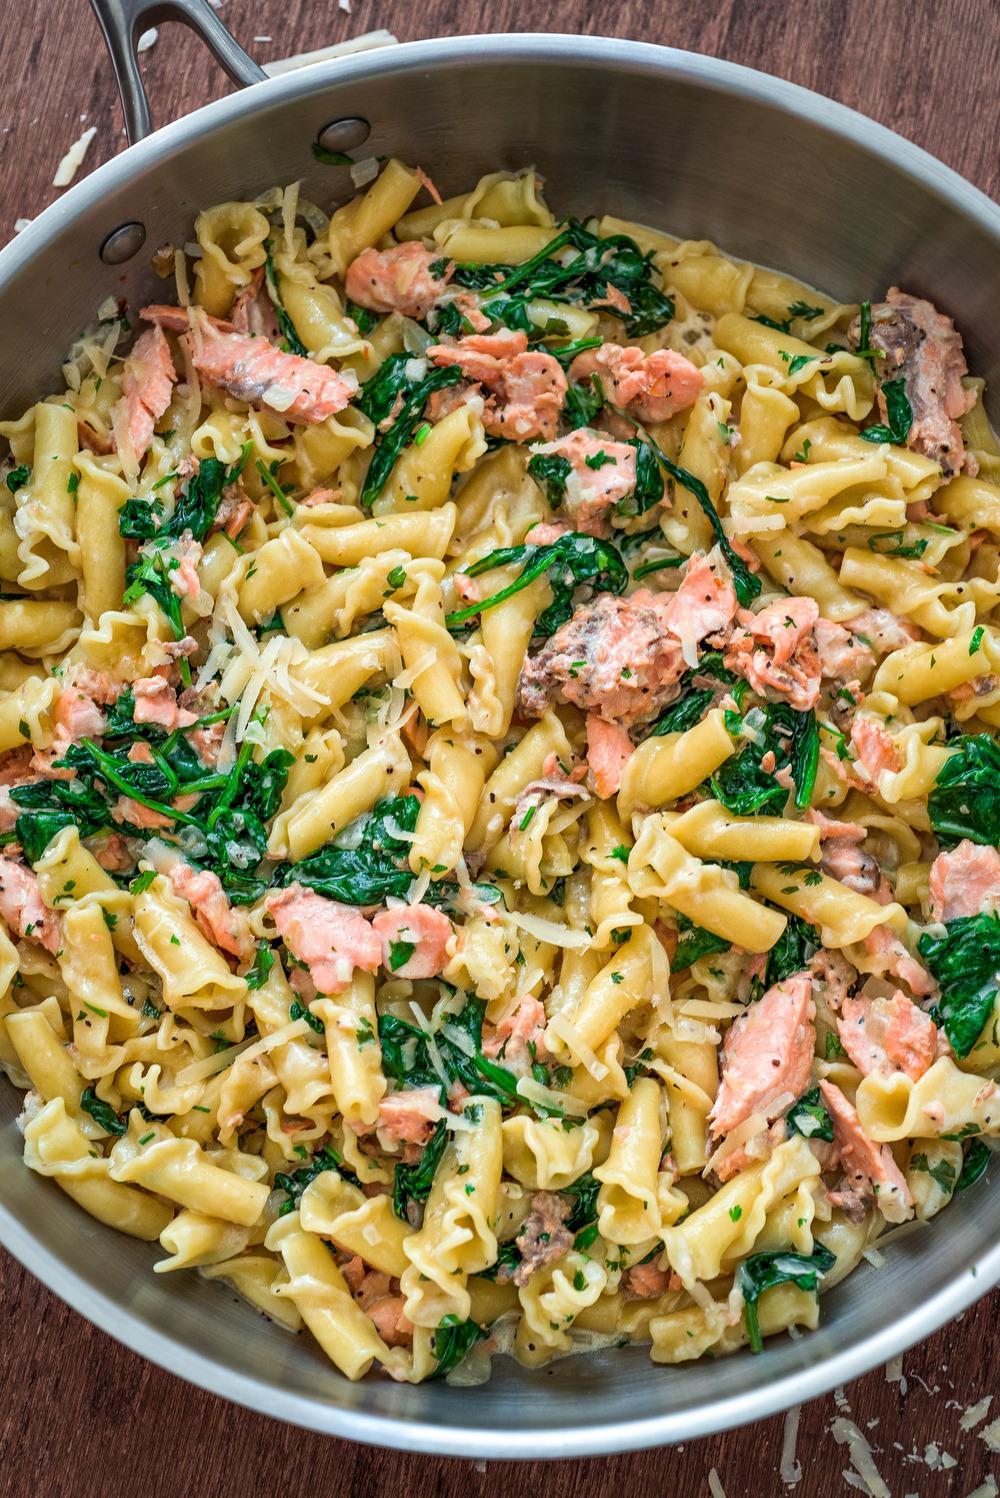 SALMON PASTA WITH SPINACH Cook Time - 20 mins Total Time - 30 mins 1 lb. salmon skinless and boneless one piece or multiple pieces 8 oz. uncooked pasta I use campanelle 3 tbsp.